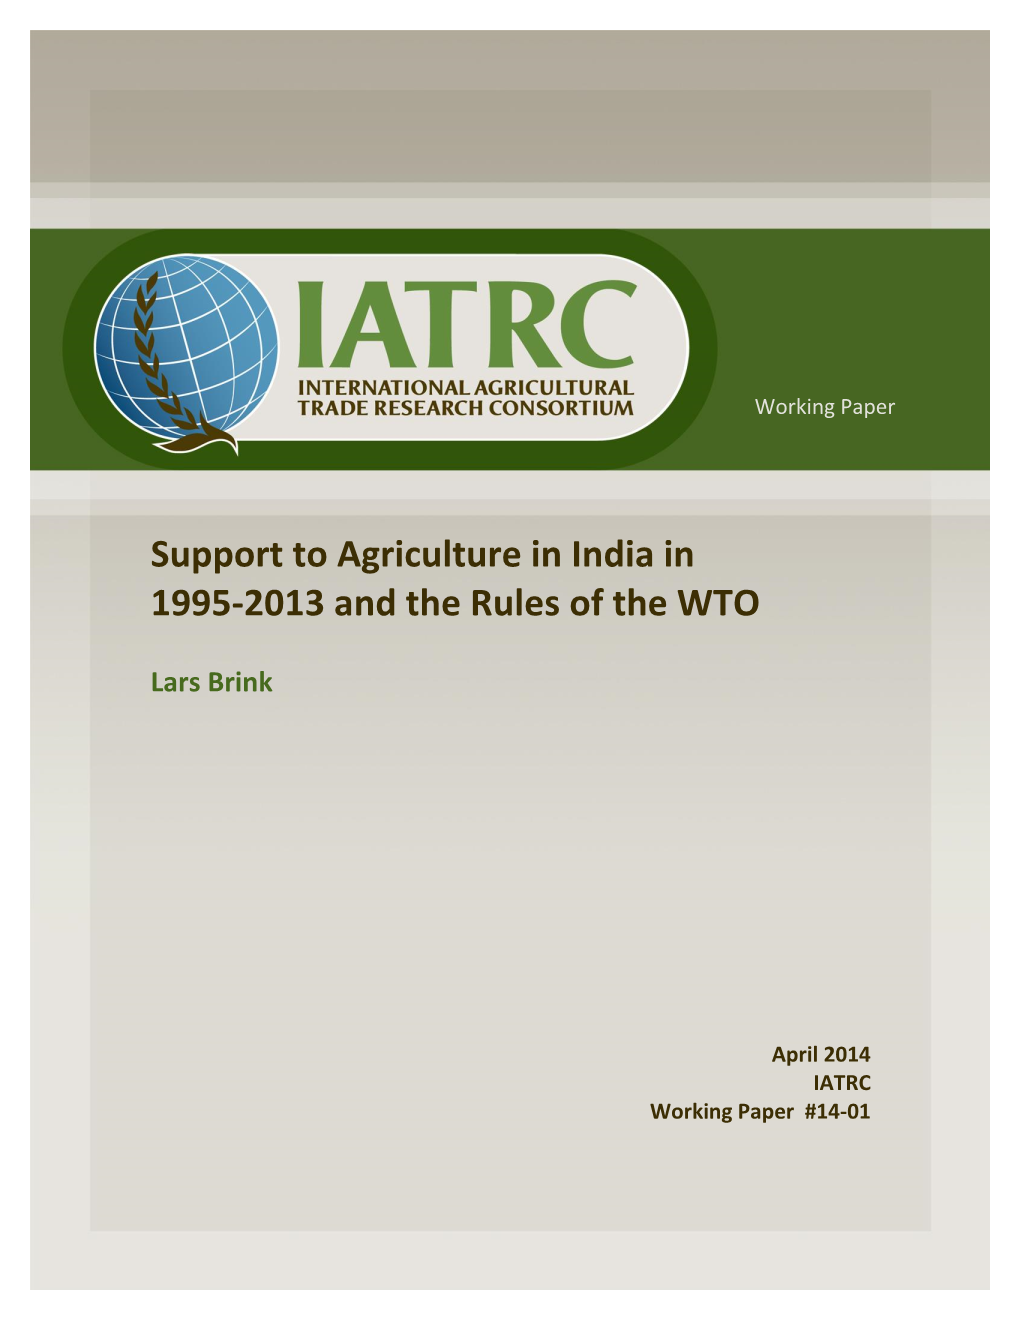 Support to Agriculture in India in 1995-2013 and the Rules of the WTO